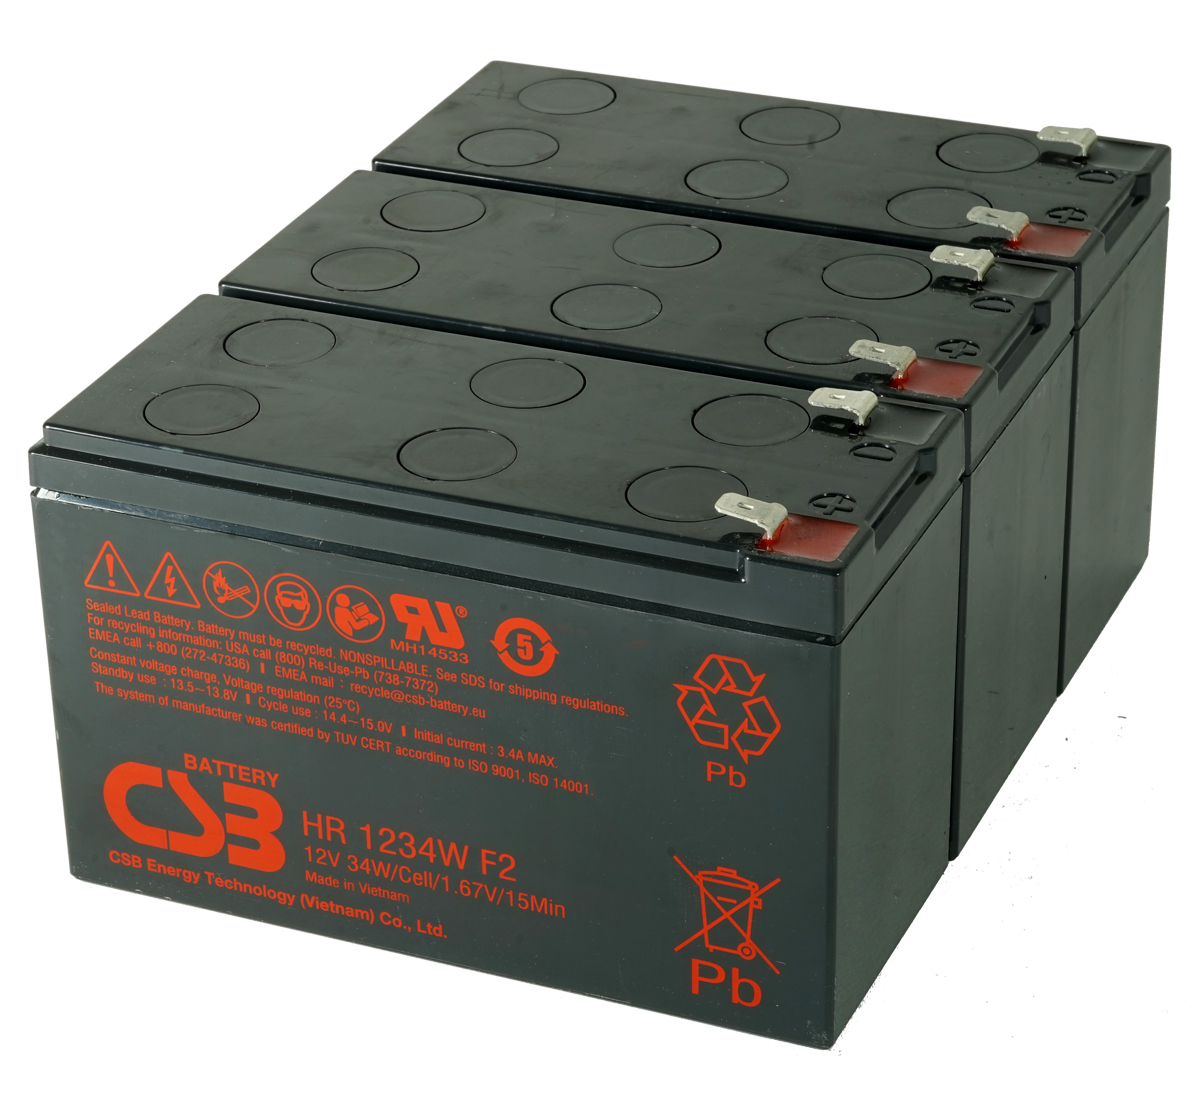 MDS1003 UPS Battery Kit for MGE AB1003